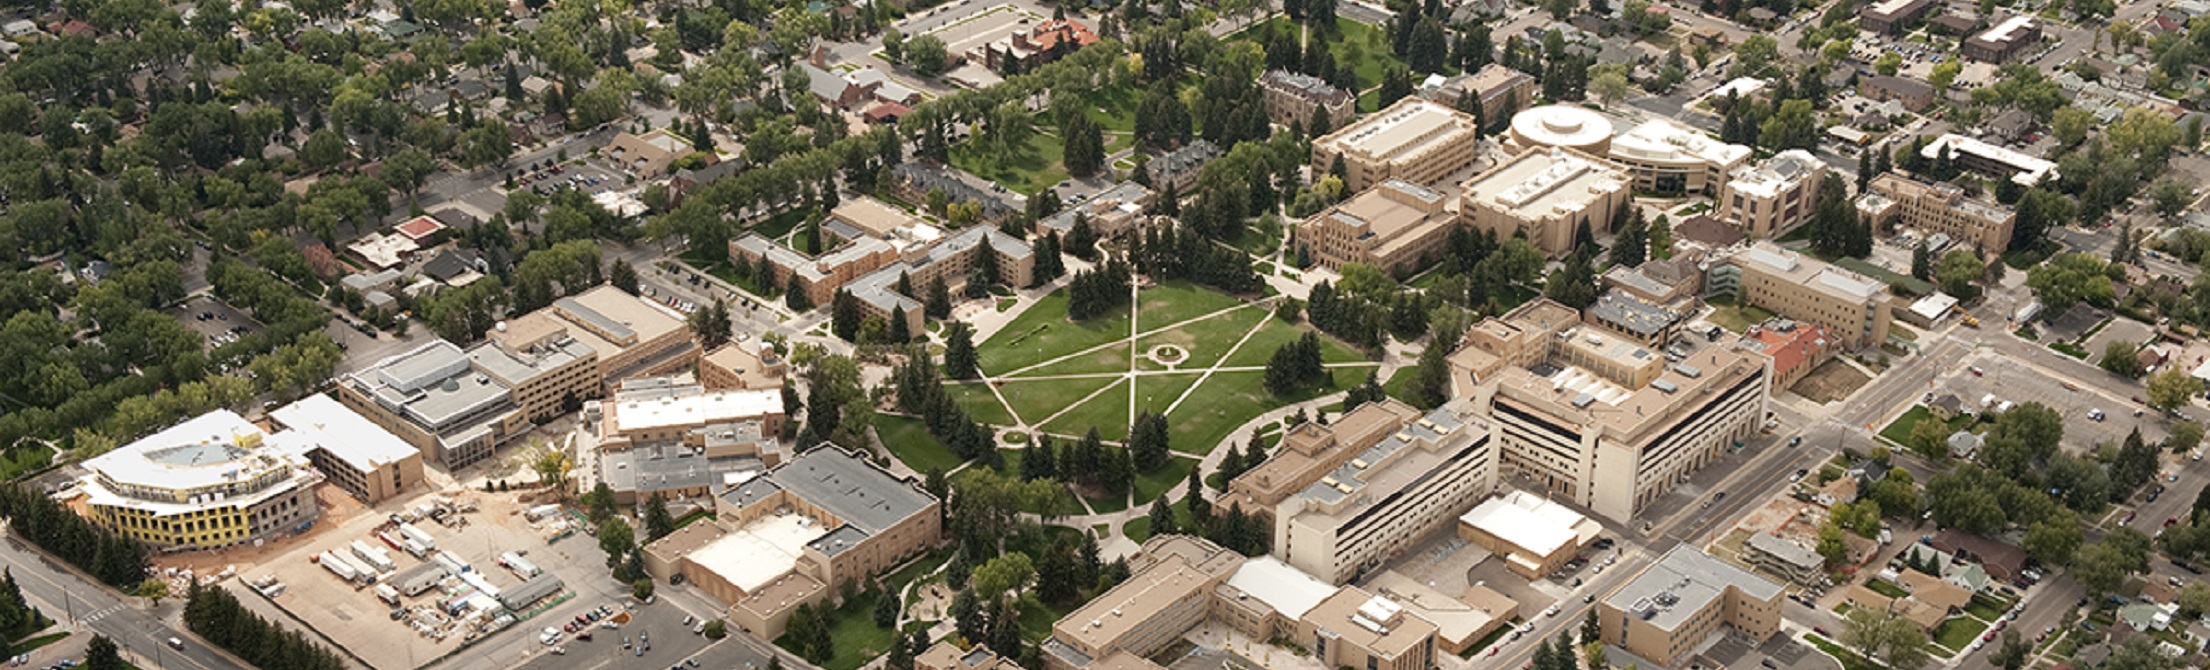 view of UWYO from above